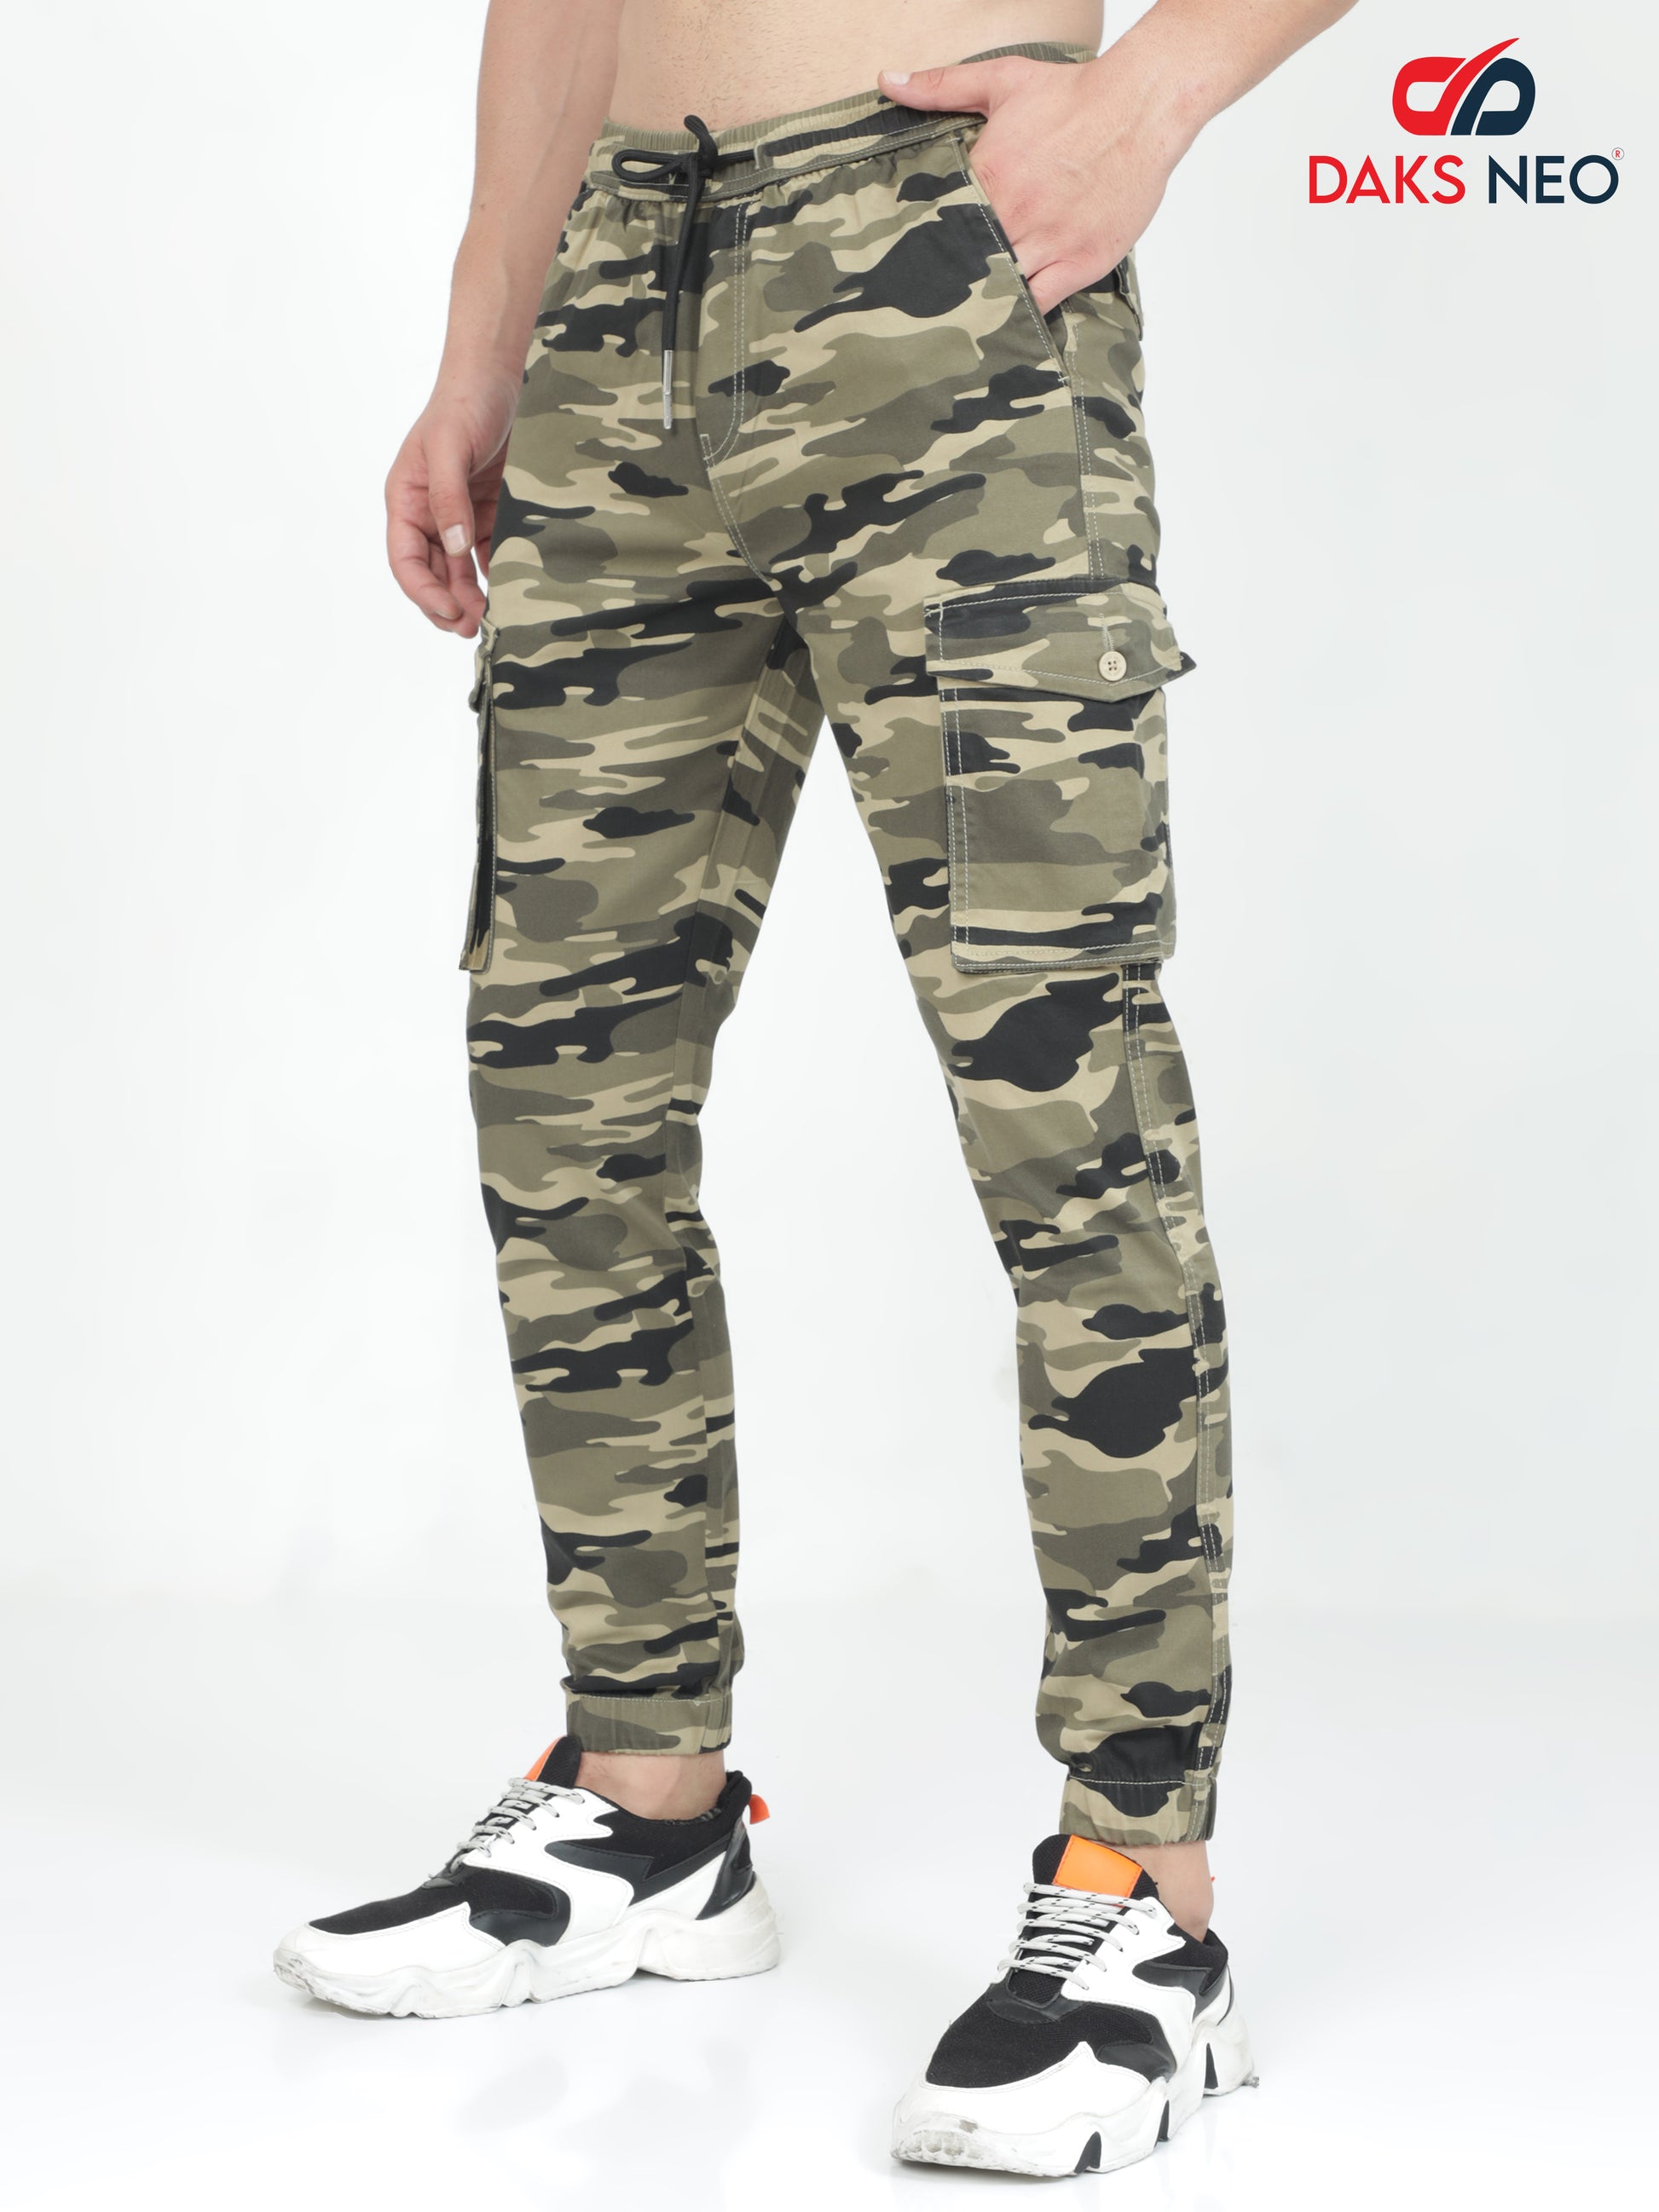 Camo Command & Men Camouflage Printed Joggers